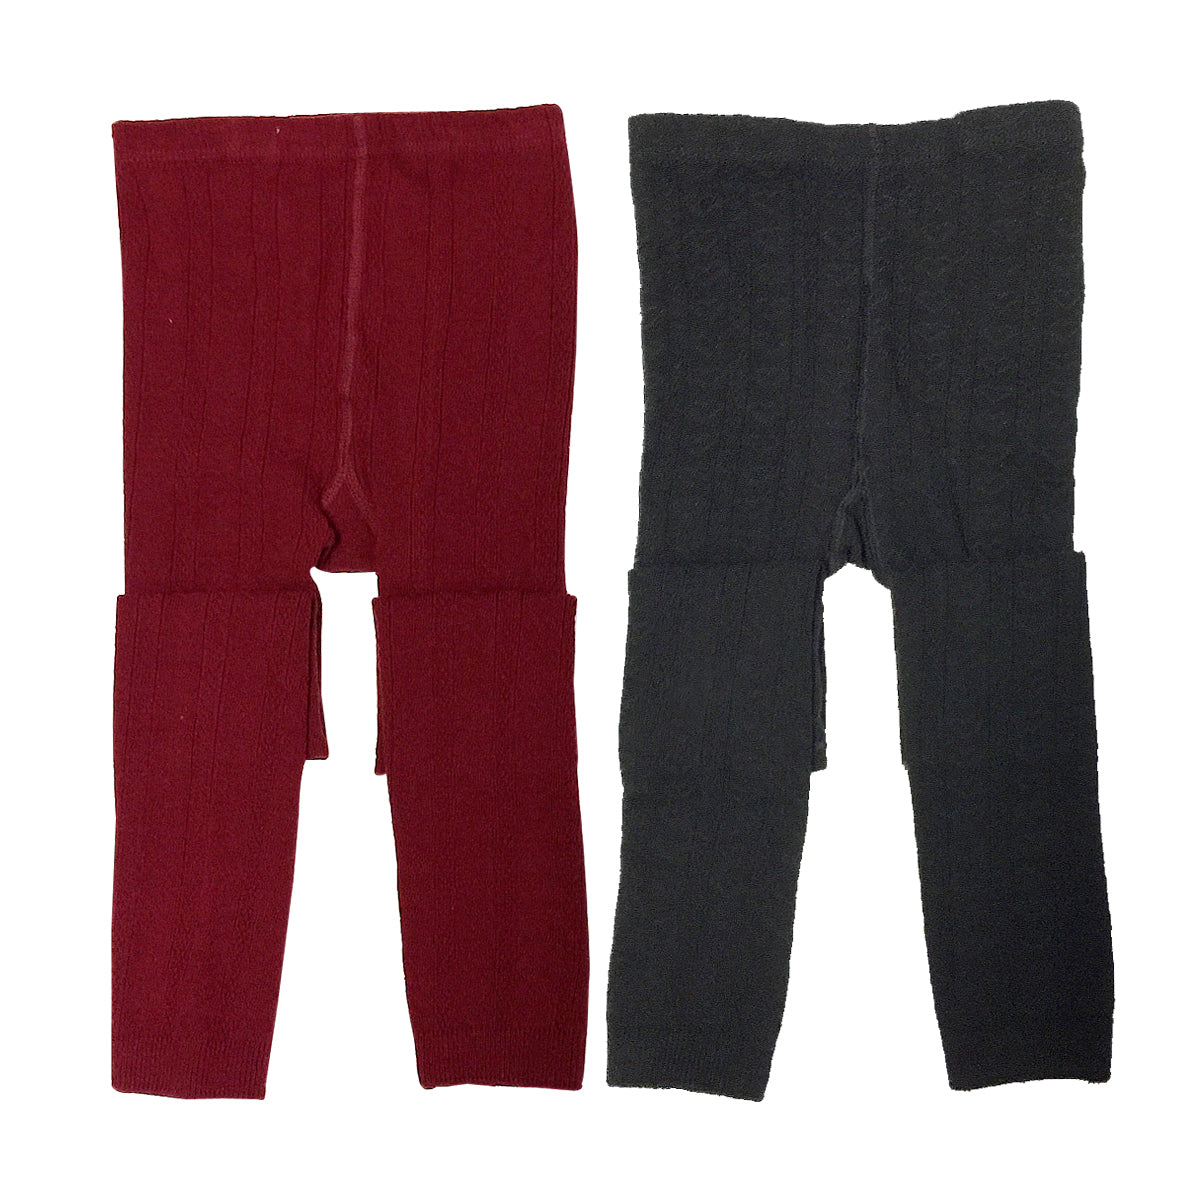 Wrapables Burgundy and Black Cotton Heart Knit Leggings for Toddlers (Set of 2)